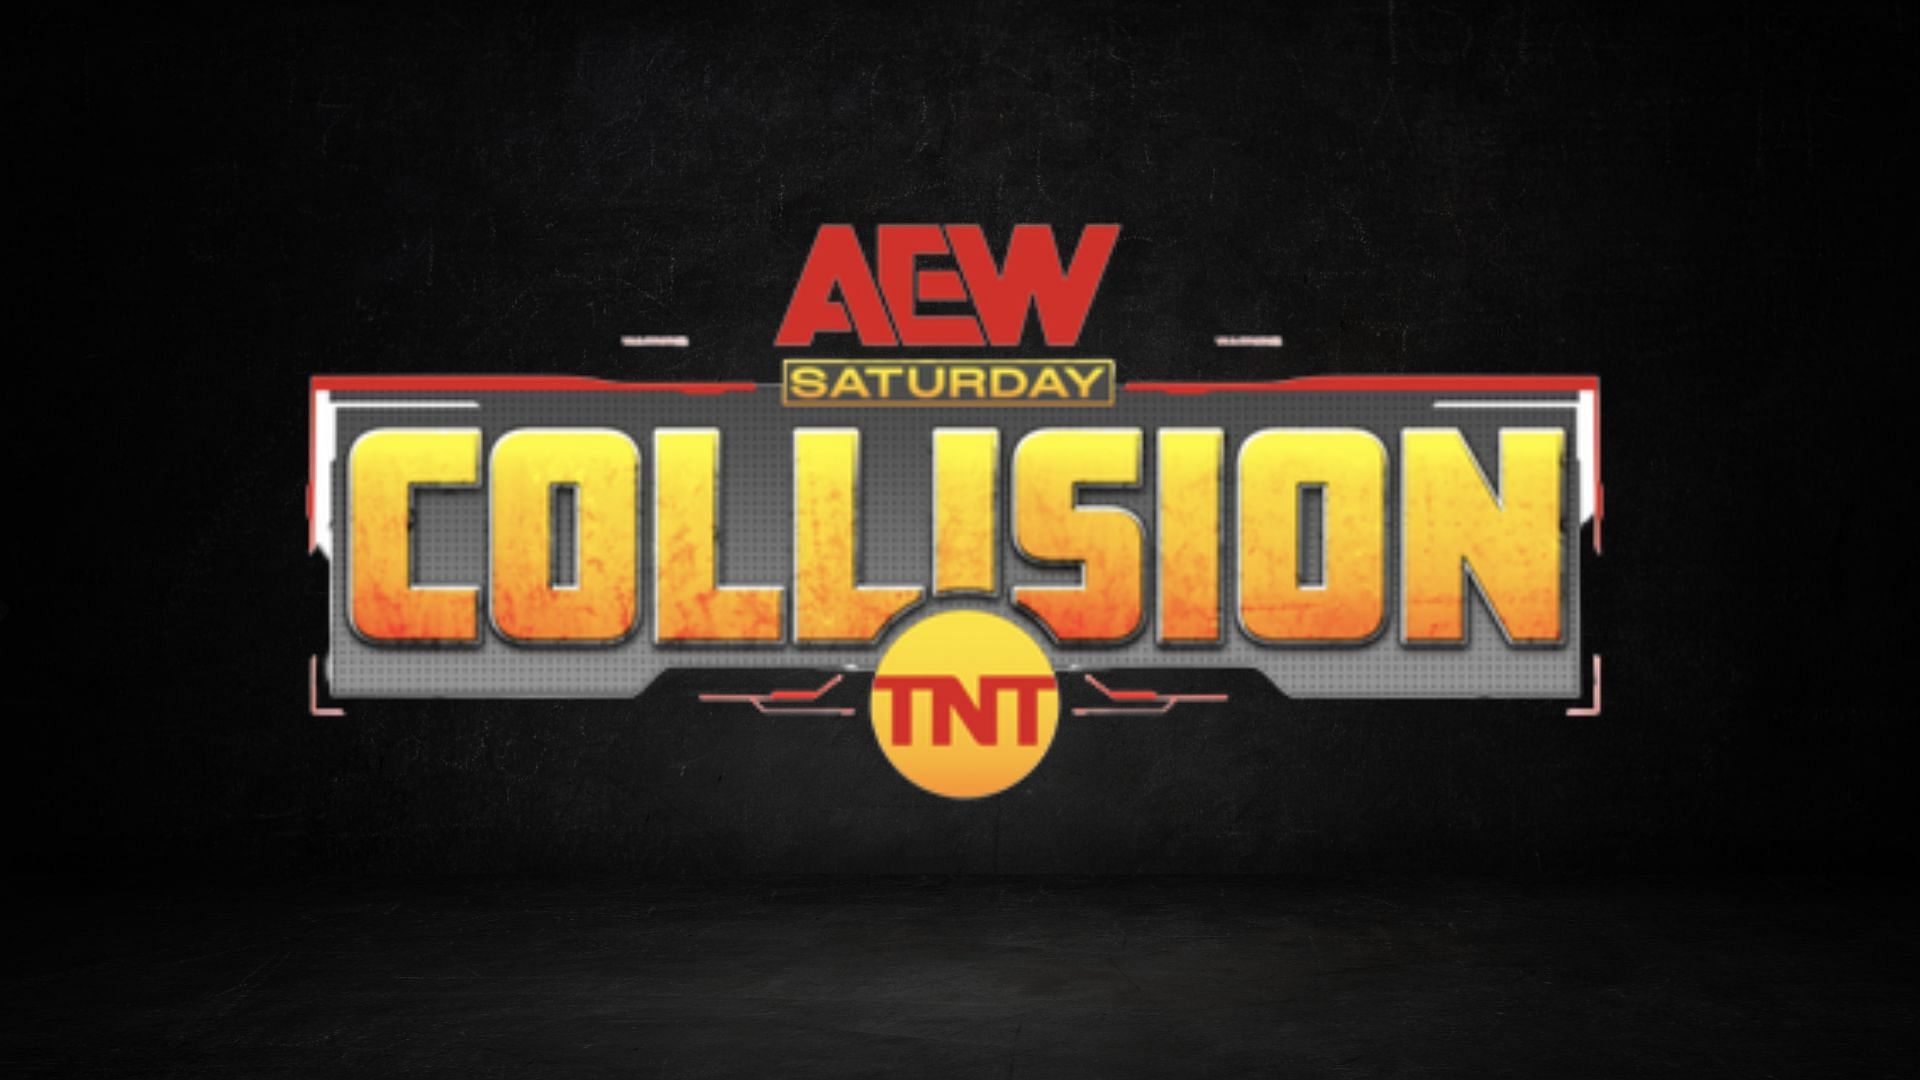 AEW Collision had a stacked card of matches this week